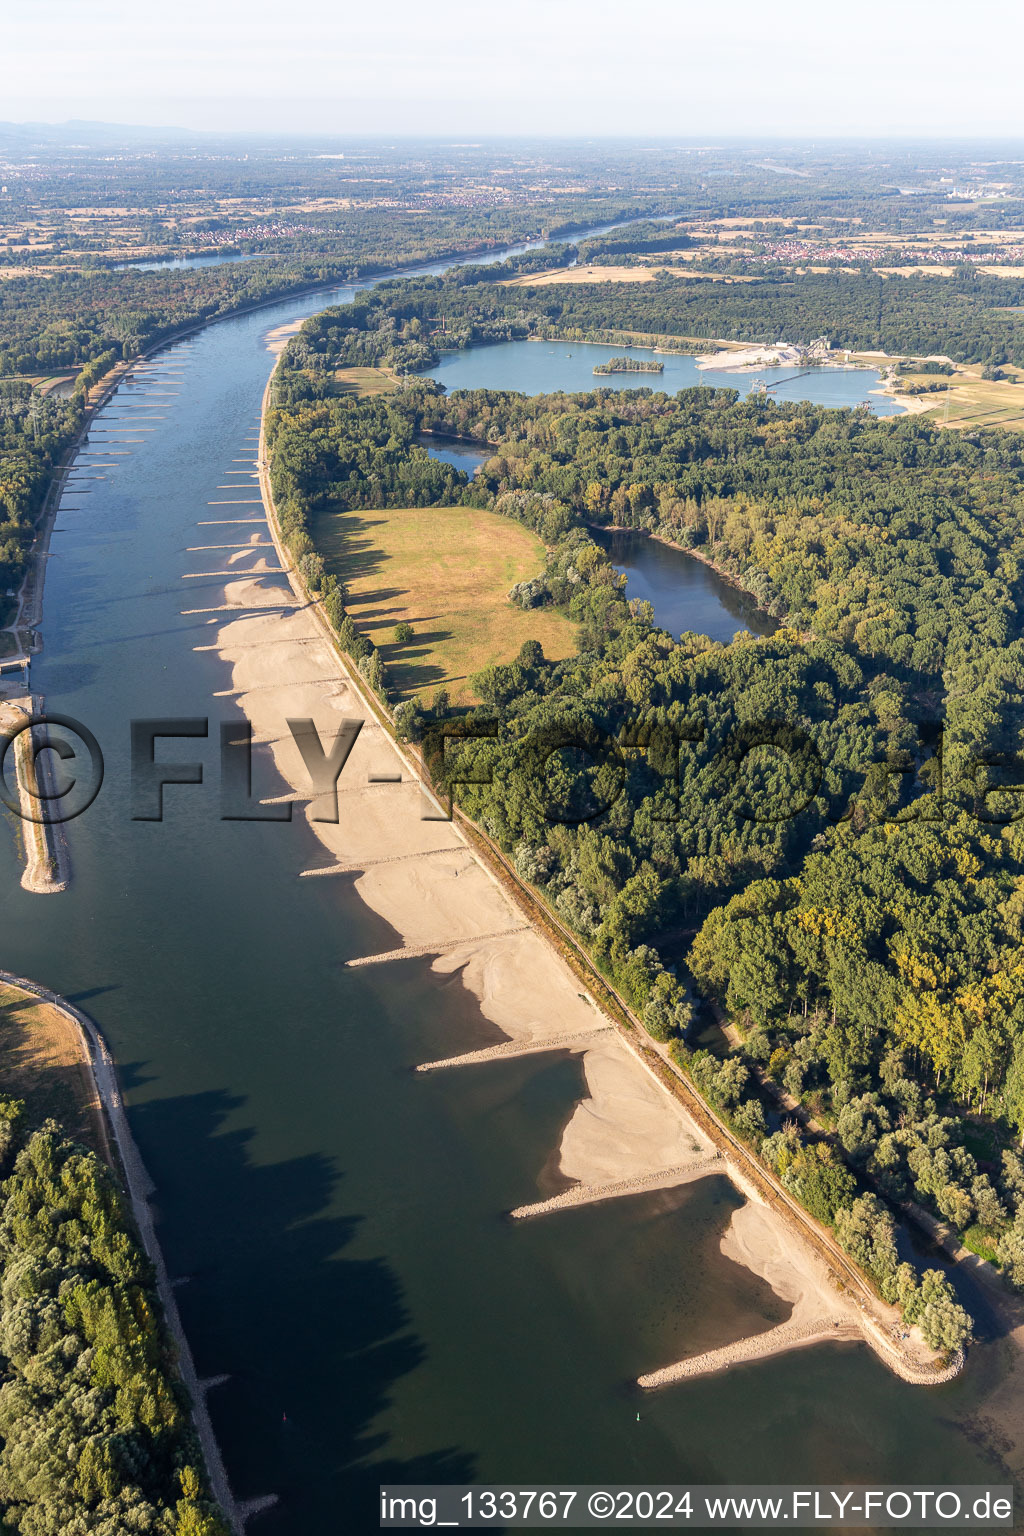 Aerial photograpy of Dry groynes and sand banks in the Rhine due to low water in the district Maximiliansau in Wörth am Rhein in the state Rhineland-Palatinate, Germany